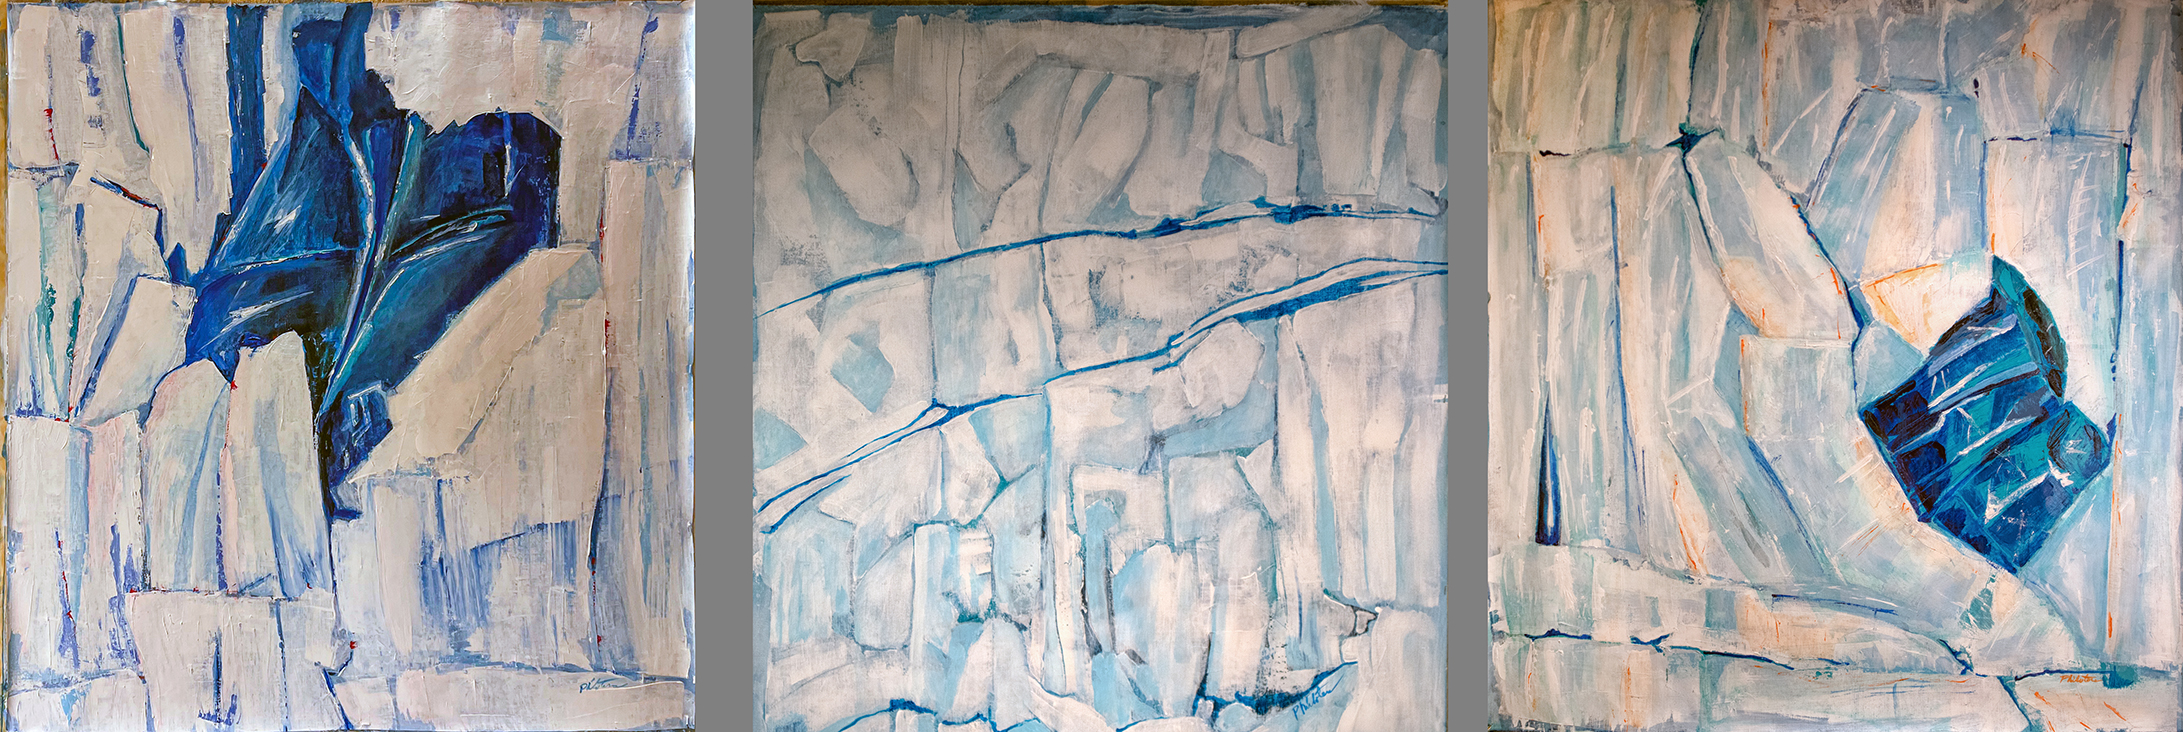 glacier paintings, blue and white, blue and white paintings